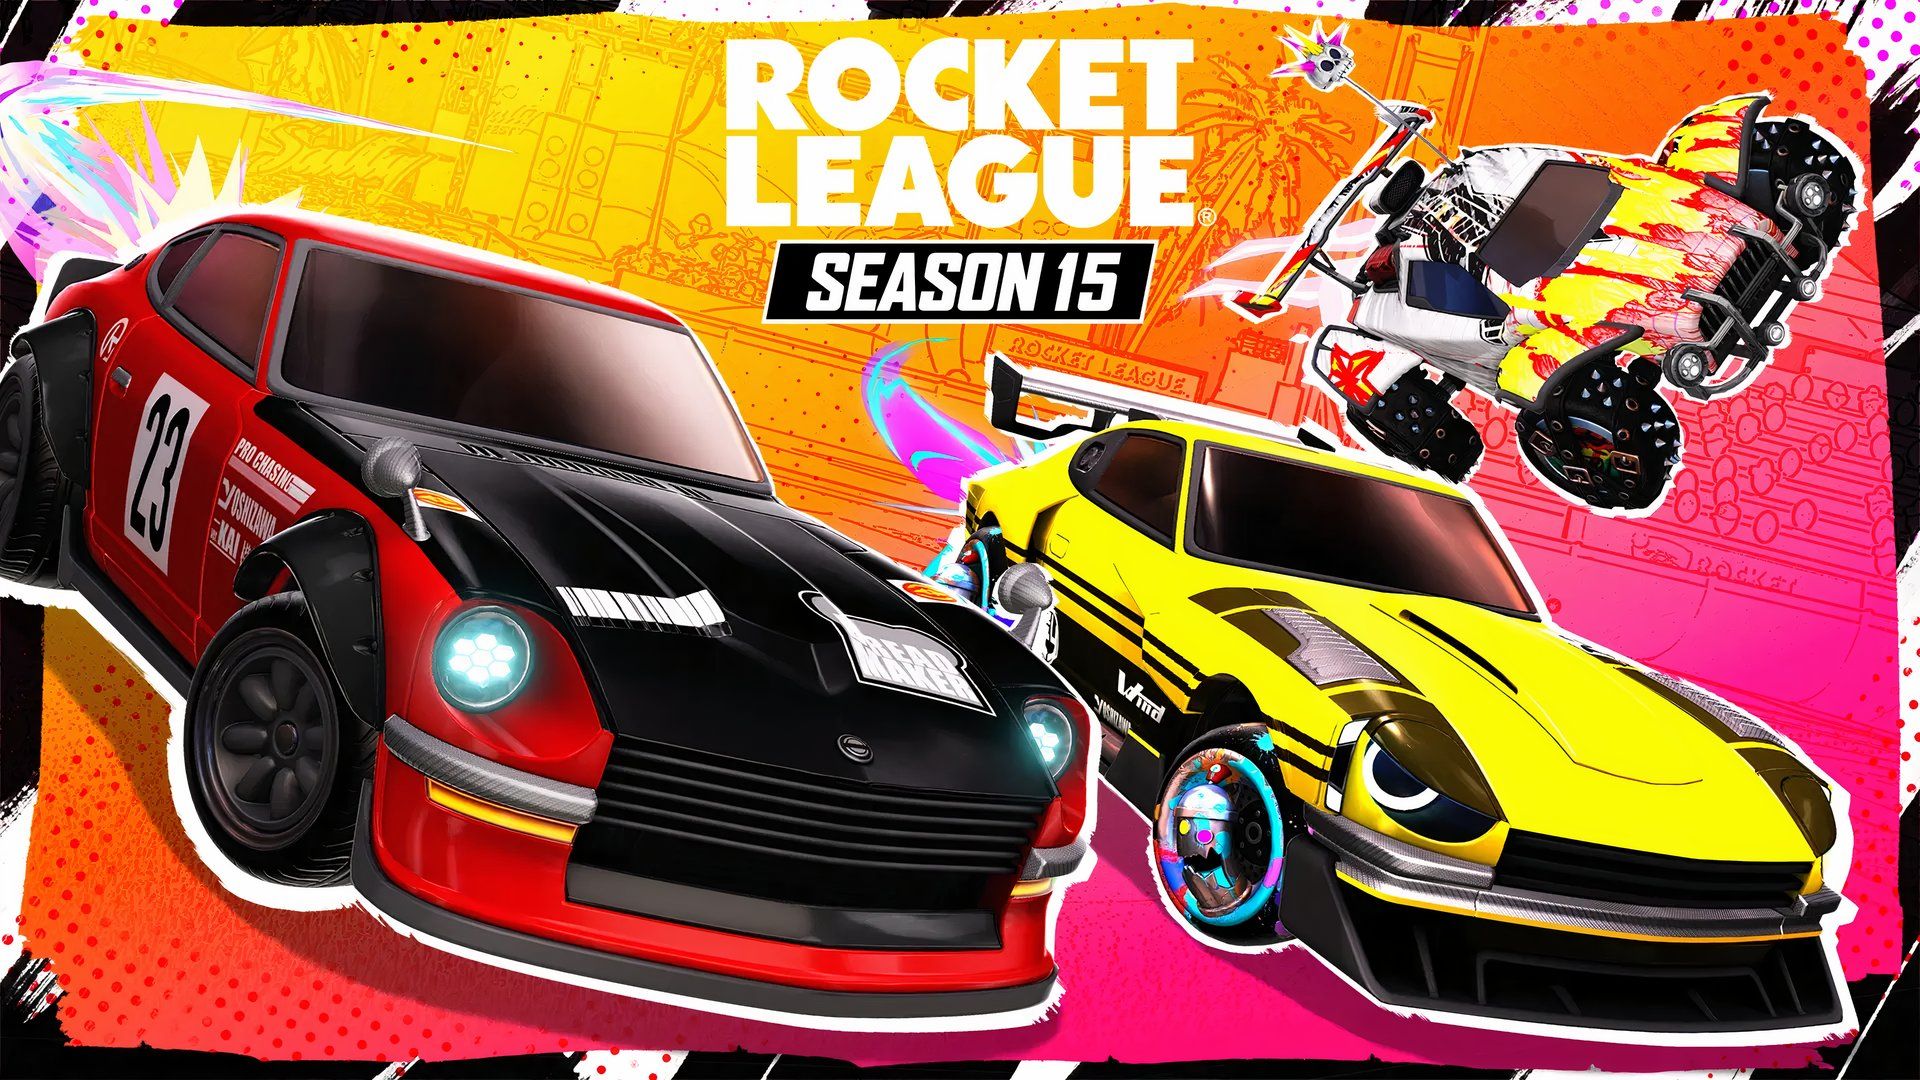 Official Rocket League Season 15 key art featuring a red, black and yellow sports car with neon pink tracks driving into the foreground